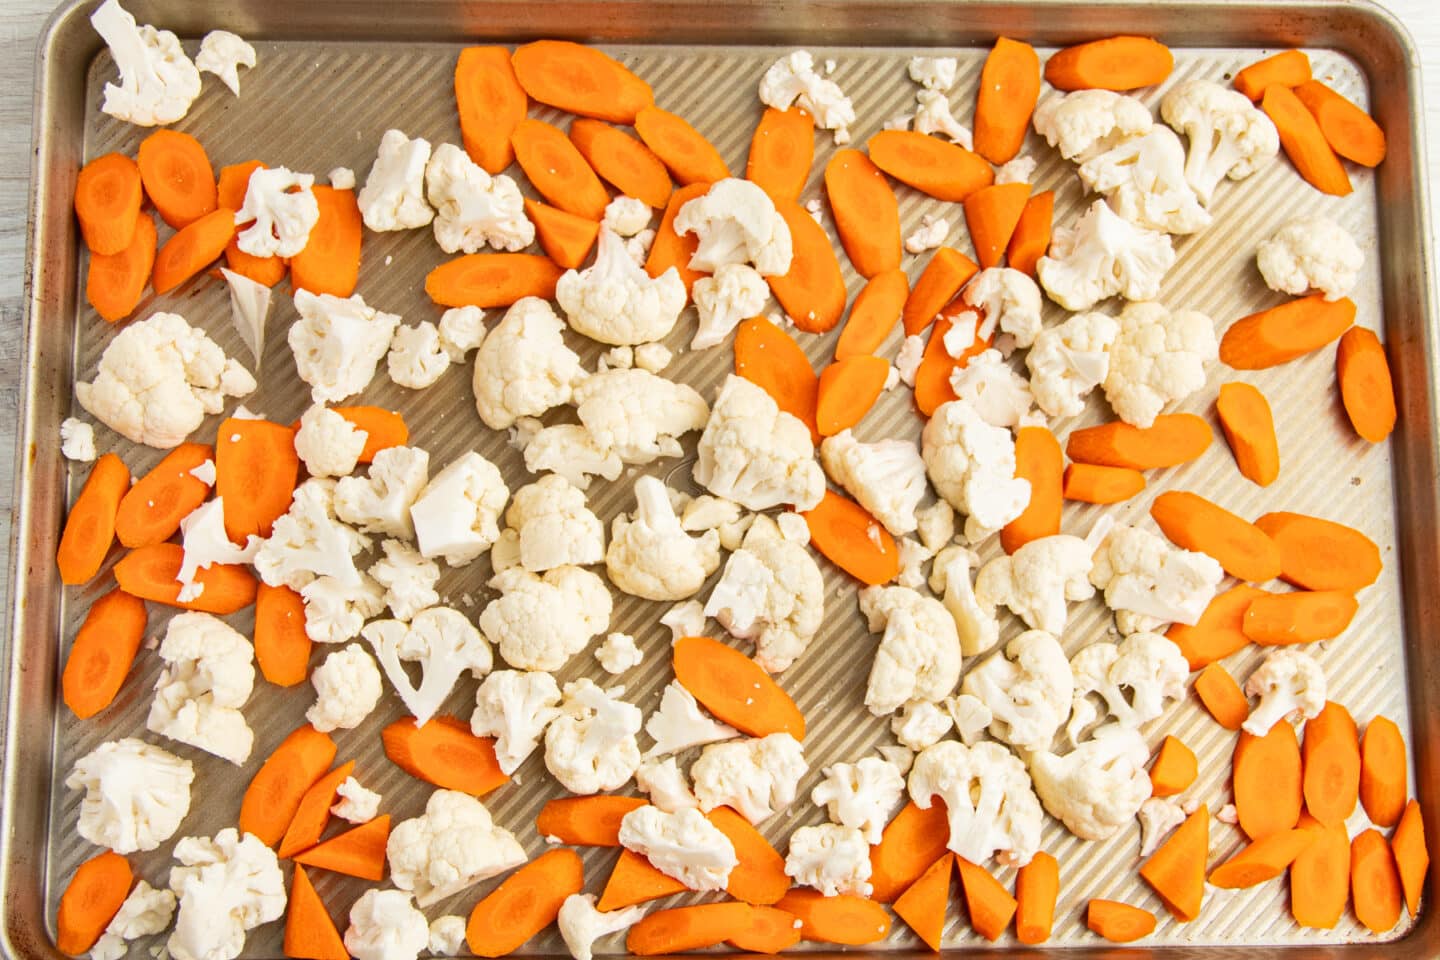 This is a picture of a baking tray with raw carrots and cauliflower.